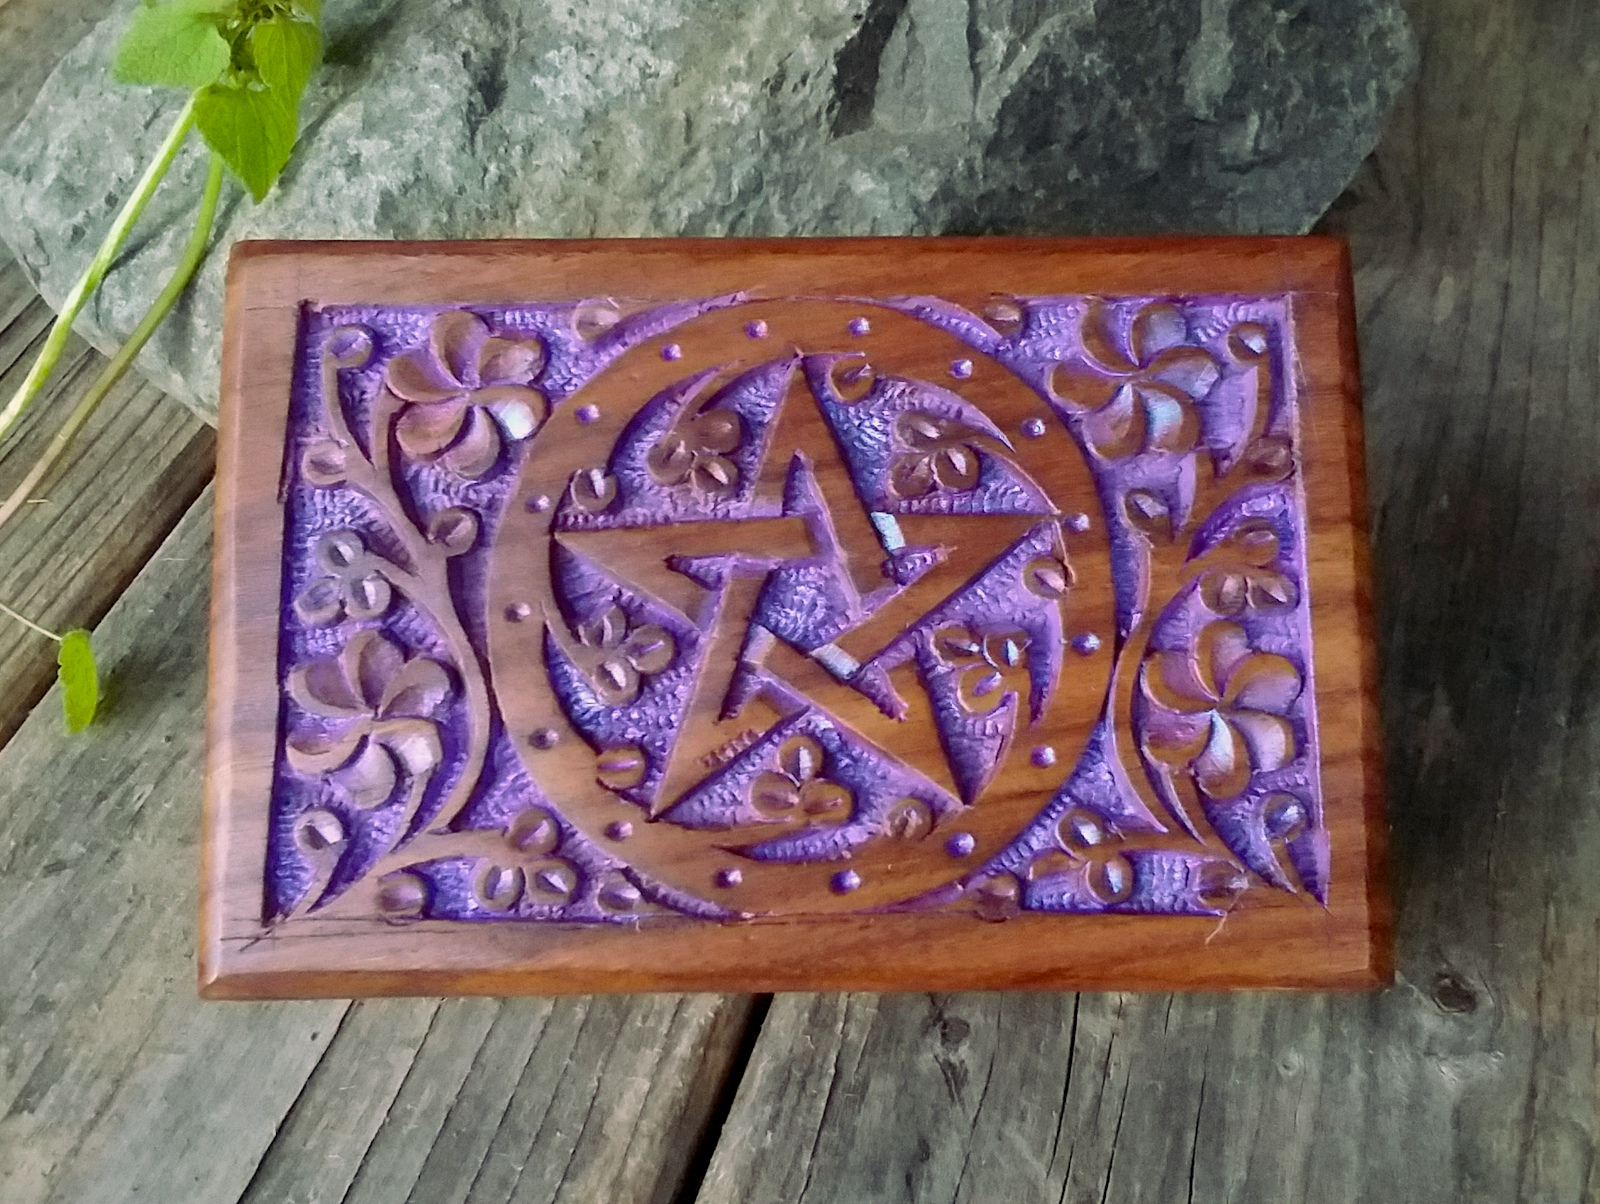 Pentacle floral carved wood box 4x6 Purple finish - Click Image to Close